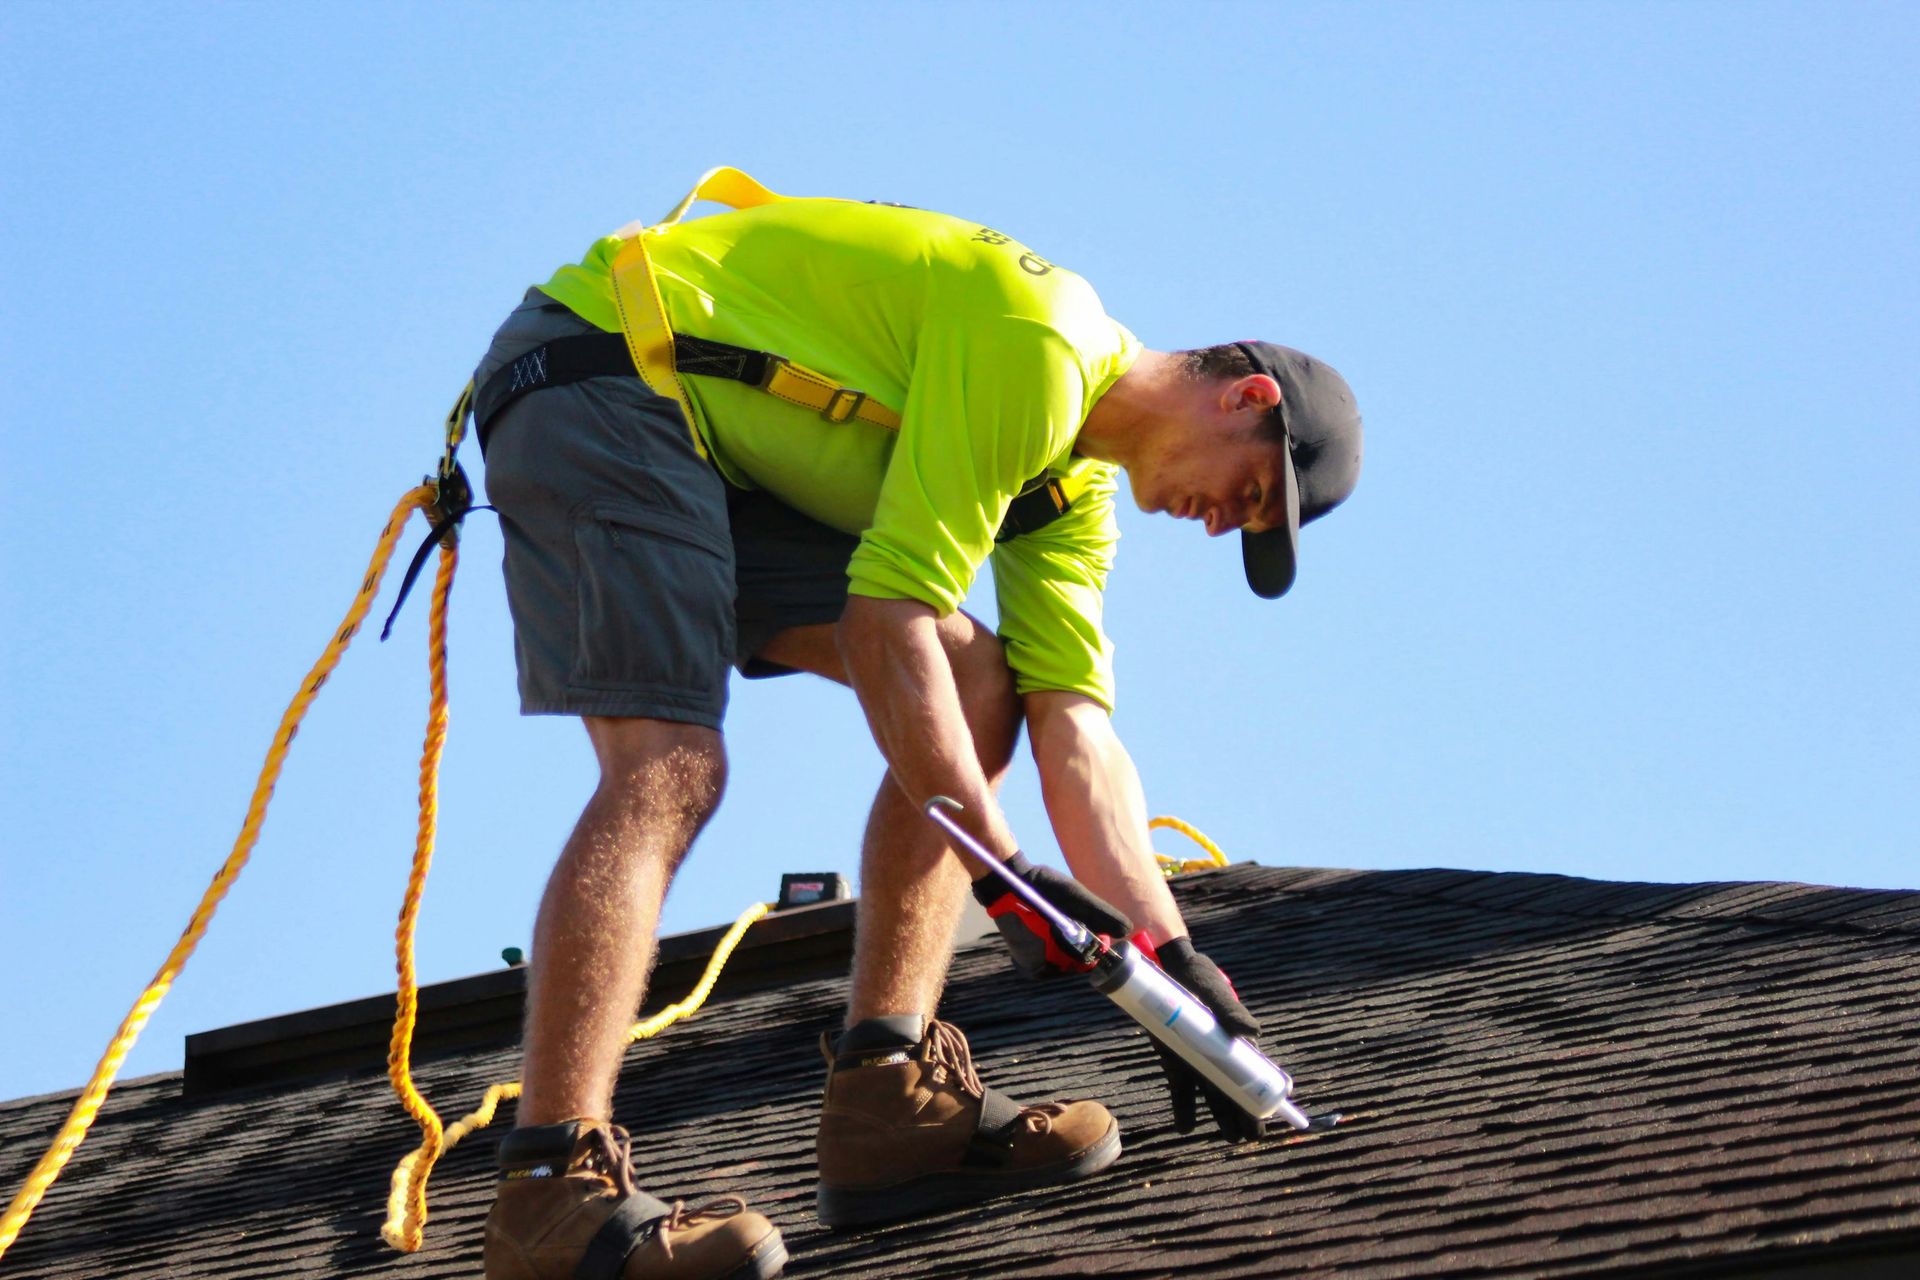 Man on roof working on a solar panel installation